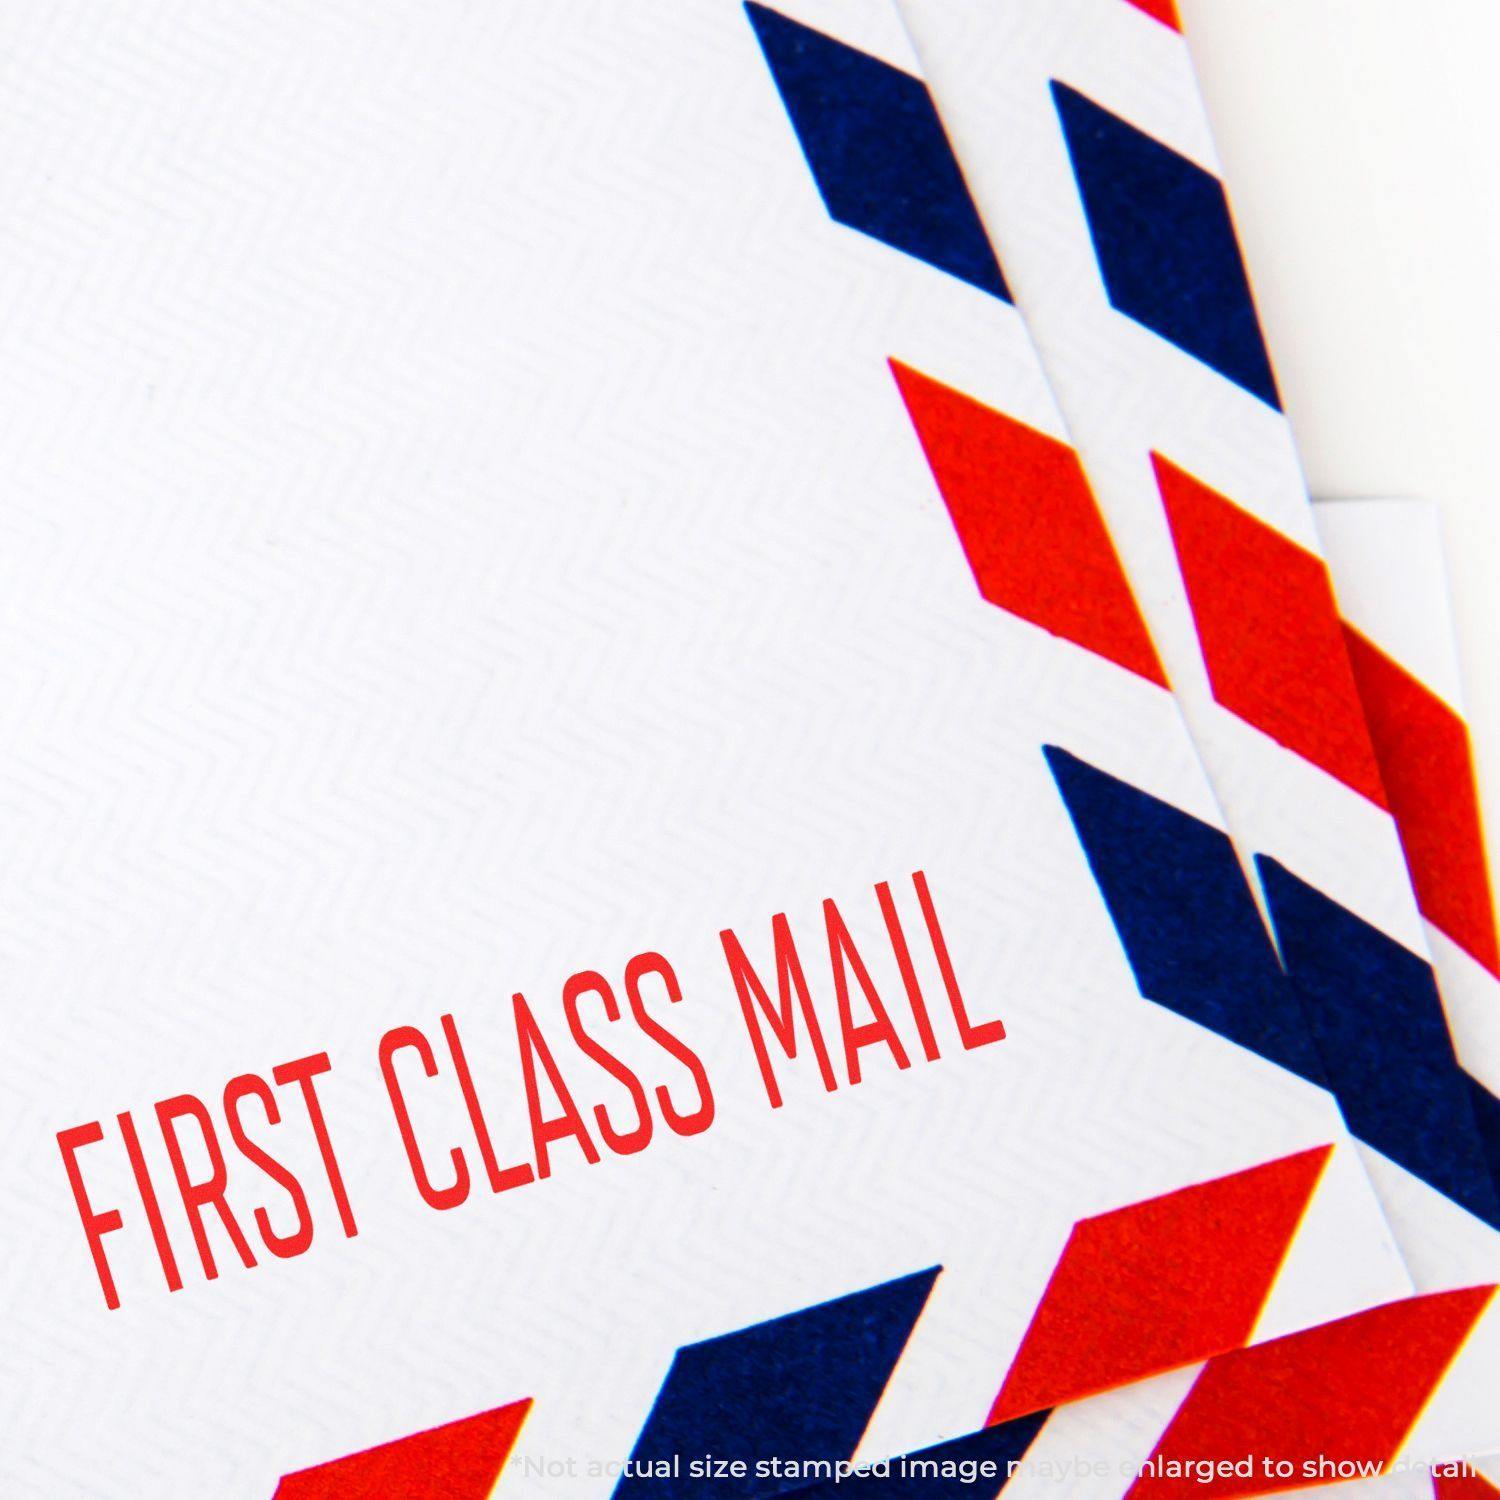 In Use Slim Pre-Inked Narrow Font First Class Mail Stamp Image